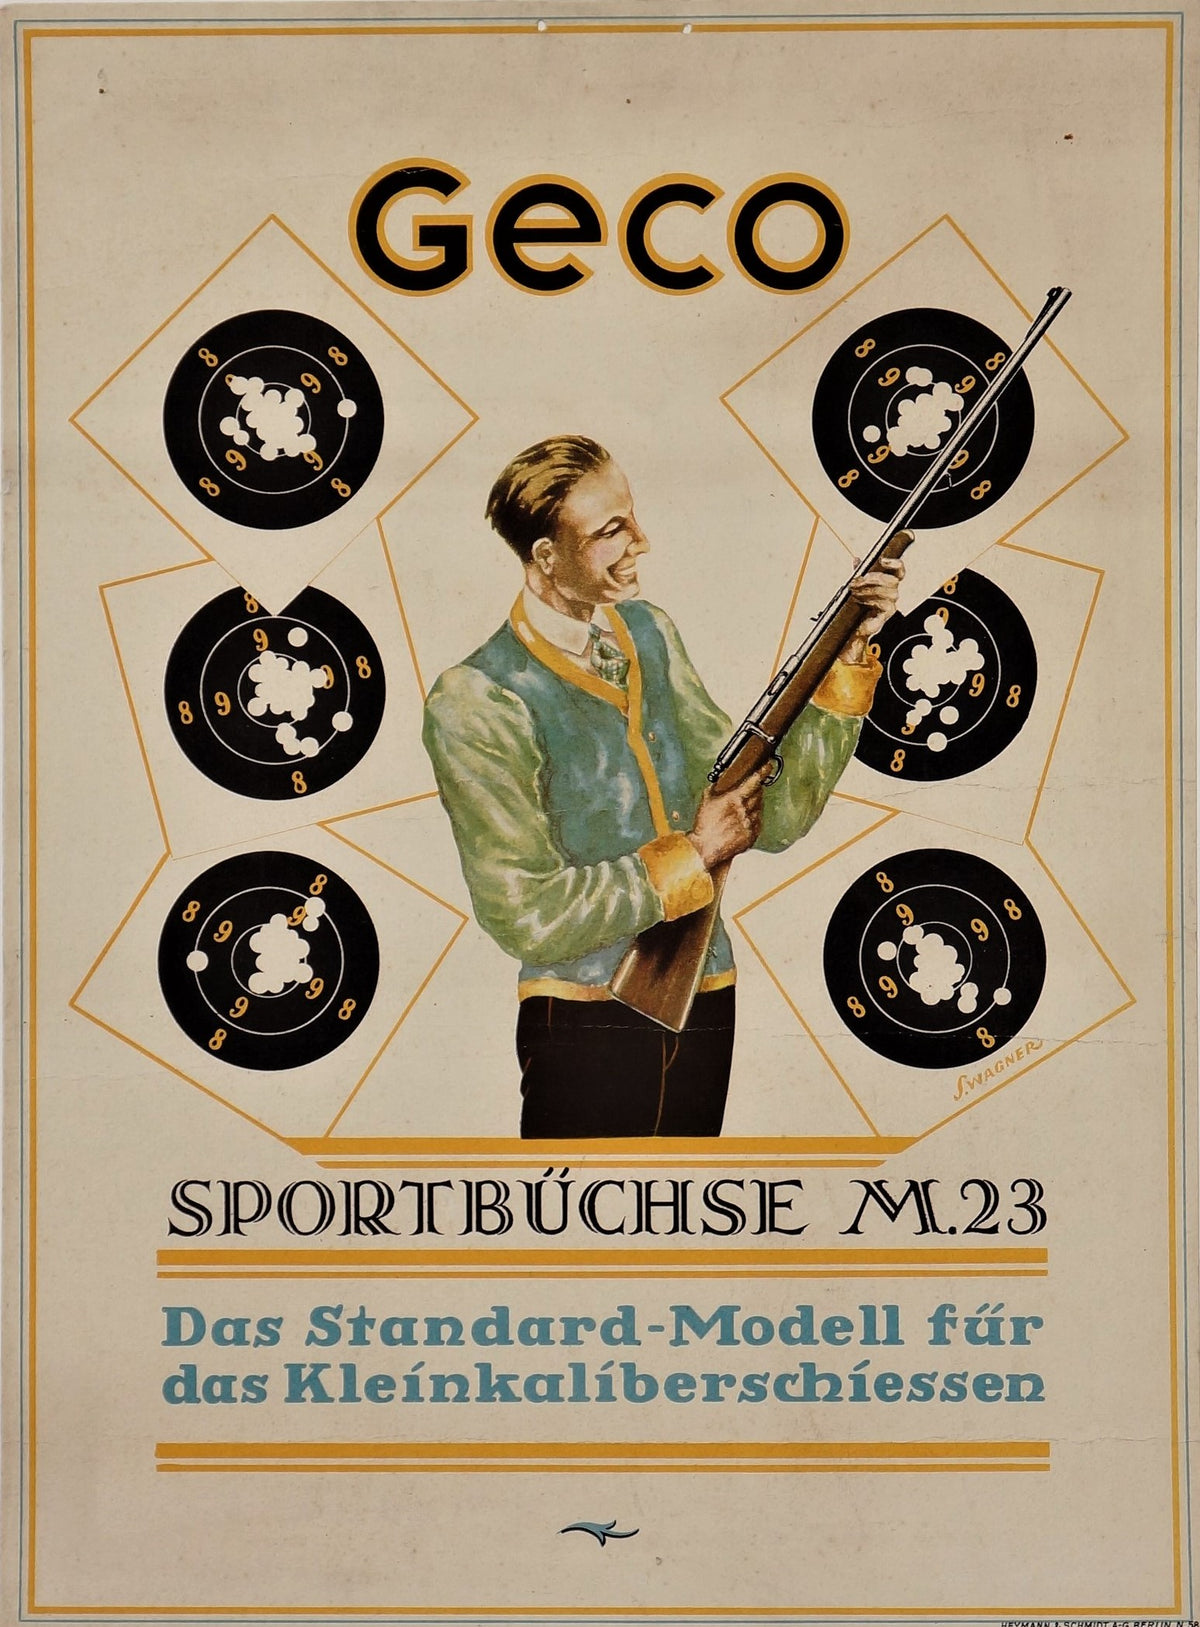 Geco, German Rifle Poster - Authentic Vintage Poster